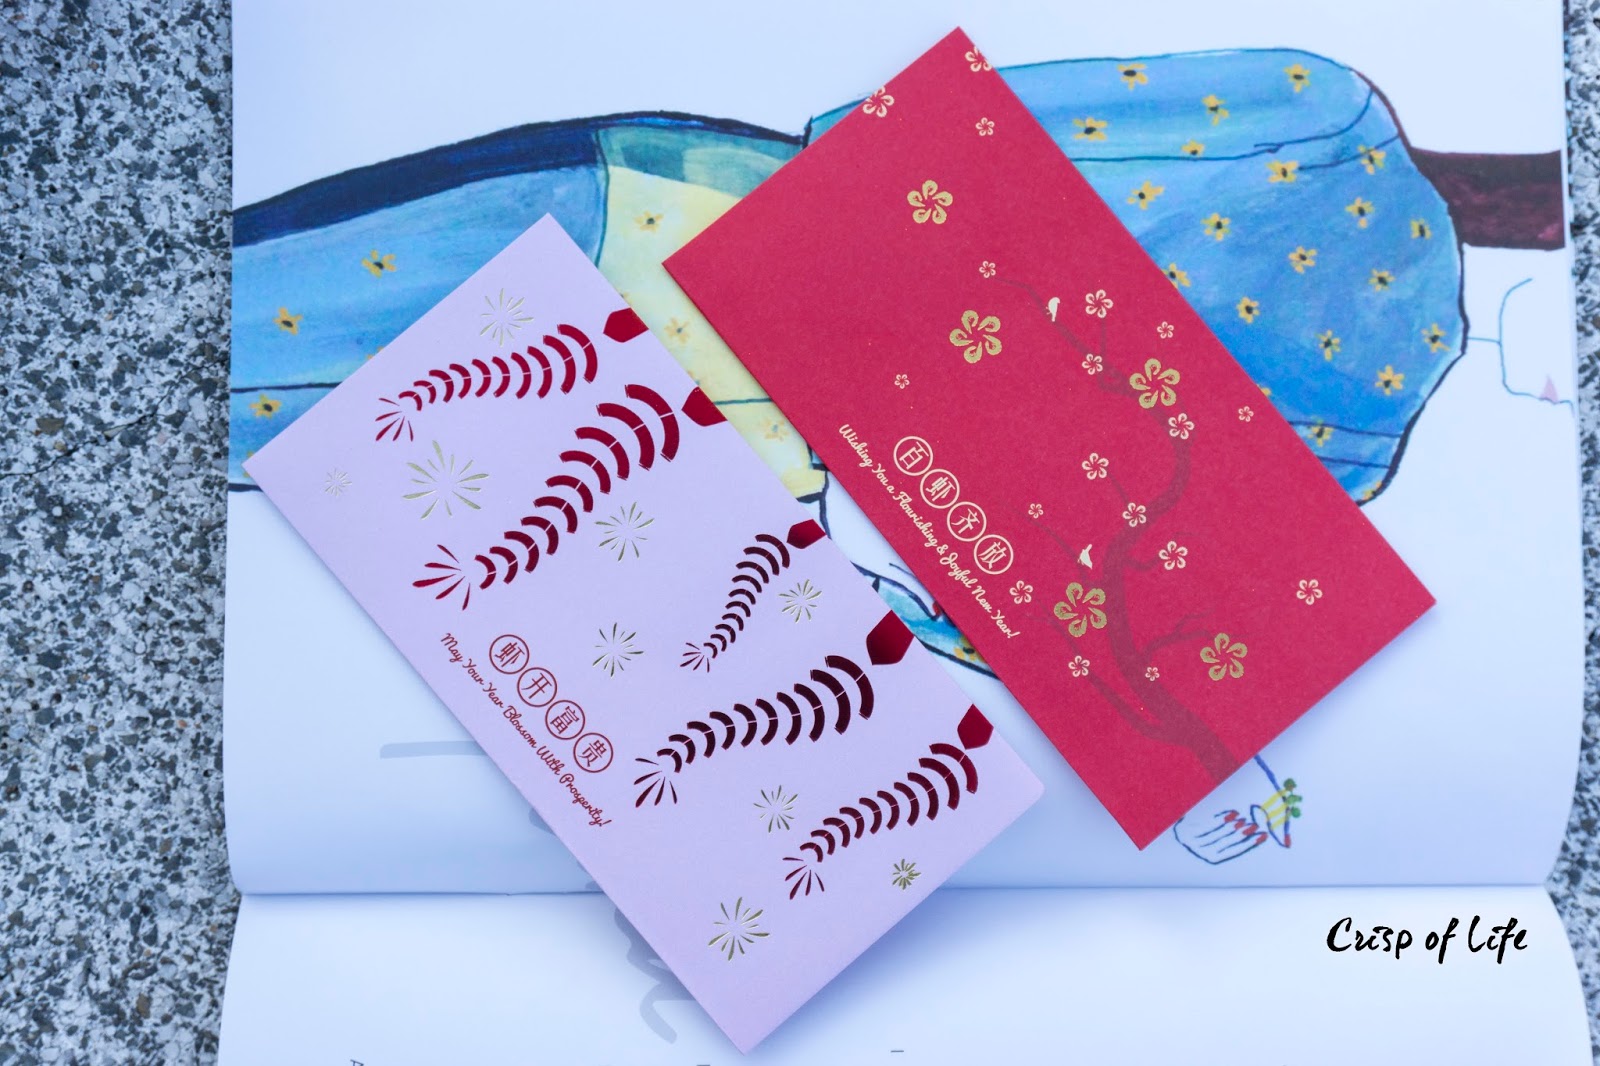 Red Packet Collection Year 2016 猴年红包聚集